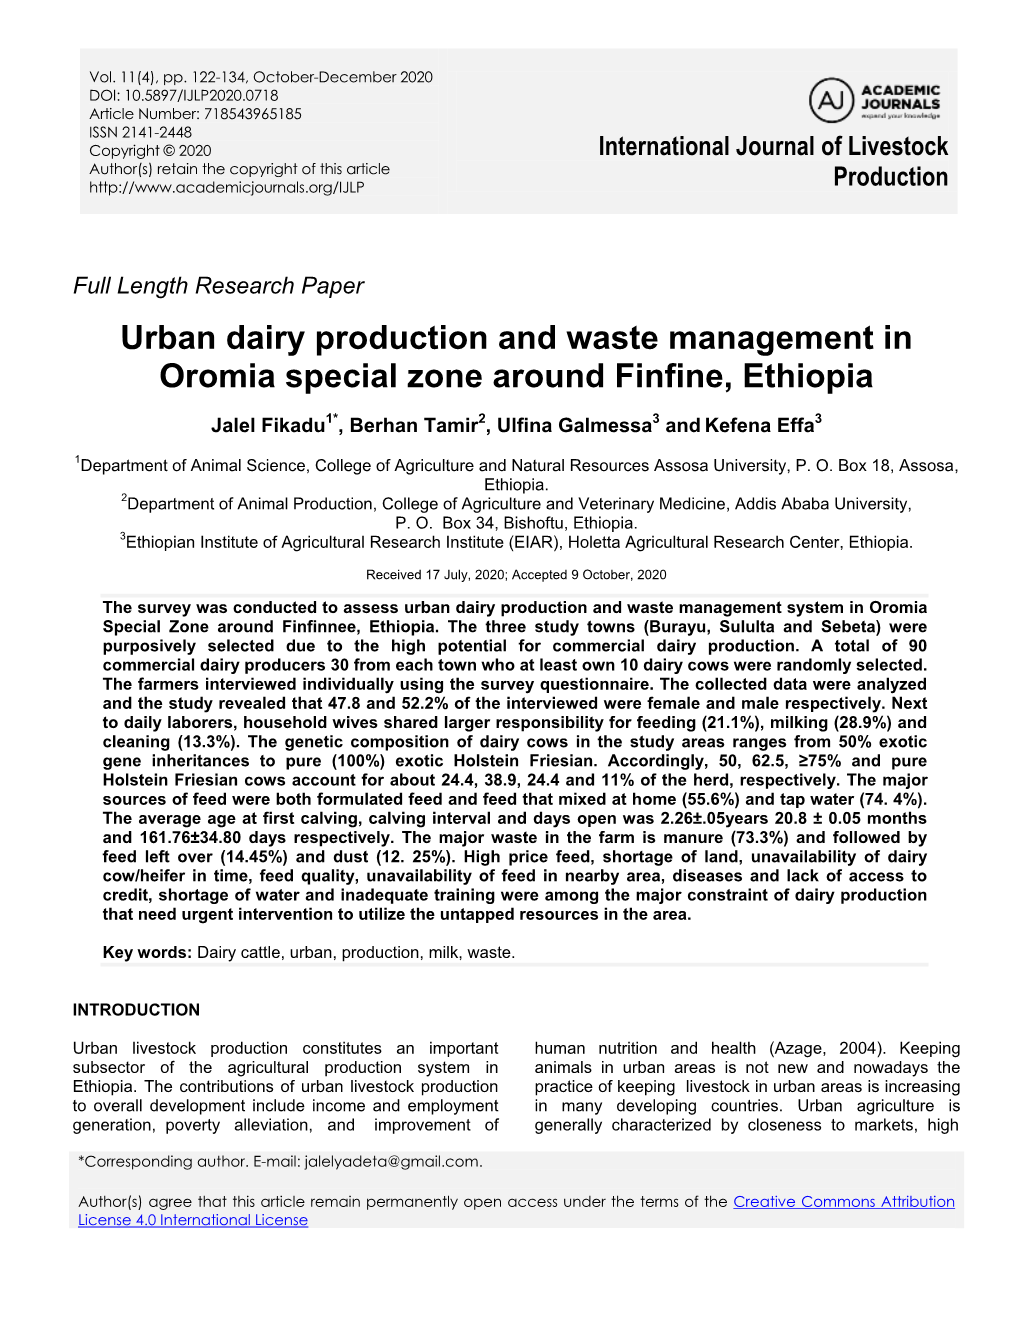 Urban Dairy Production and Waste Management in Oromia Special Zone Around Finfine, Ethiopia